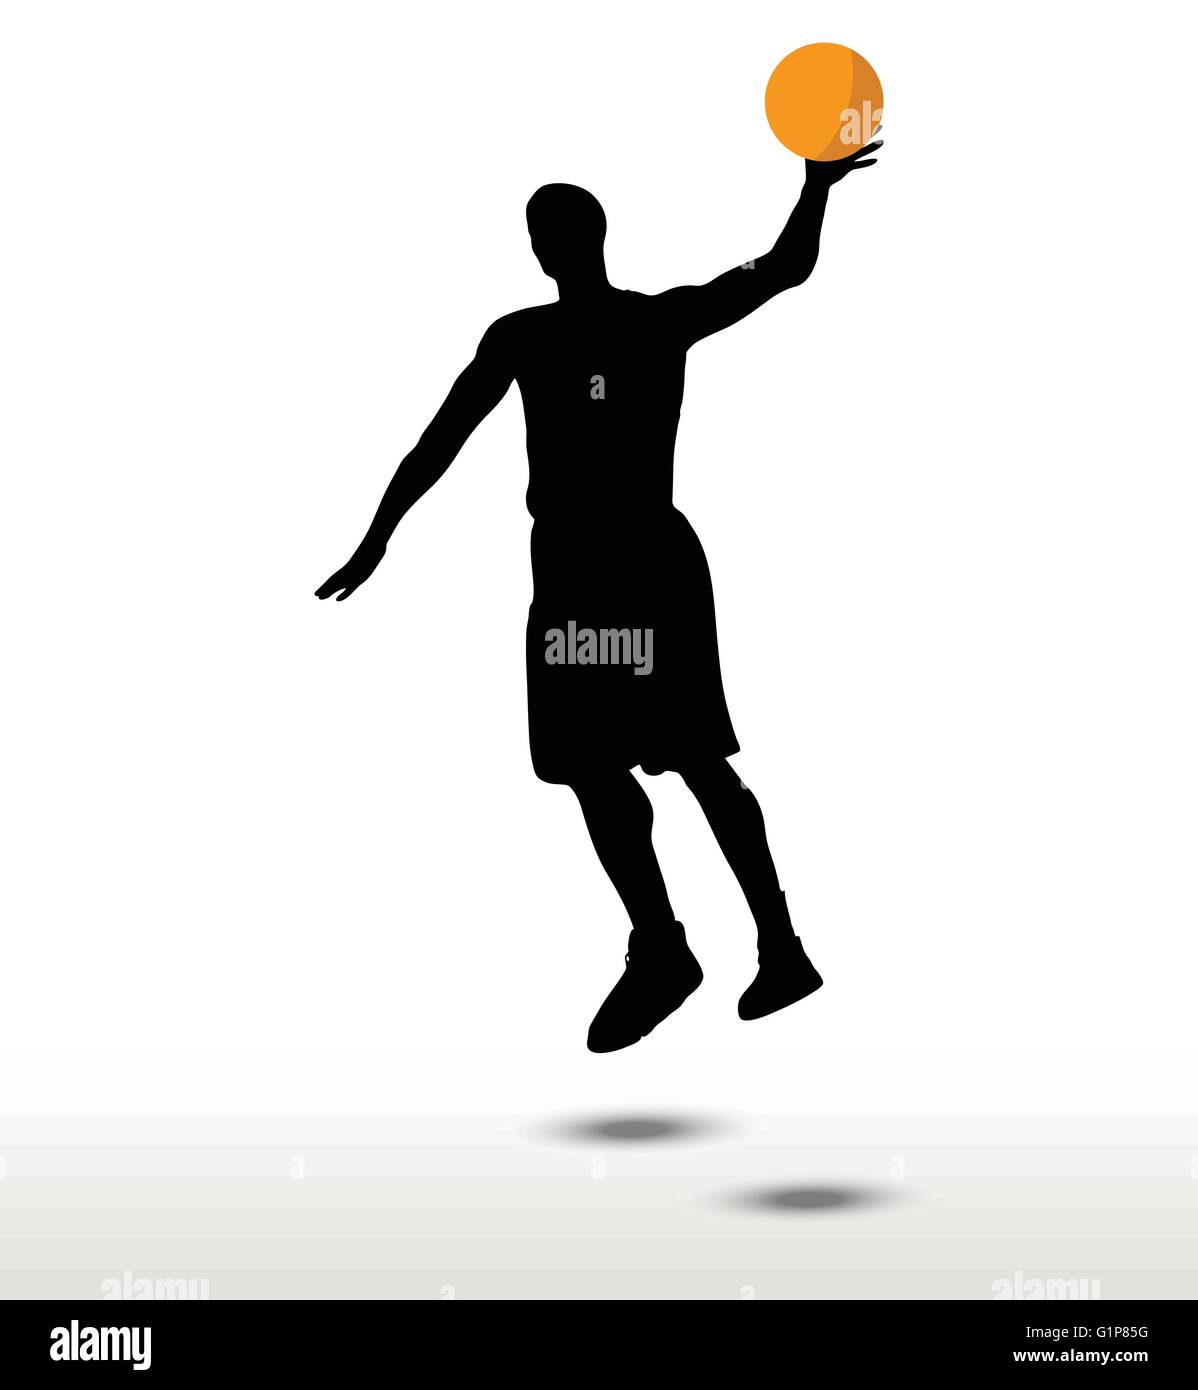 vector image - basketball player silhouette in slam pose, isolated on ...